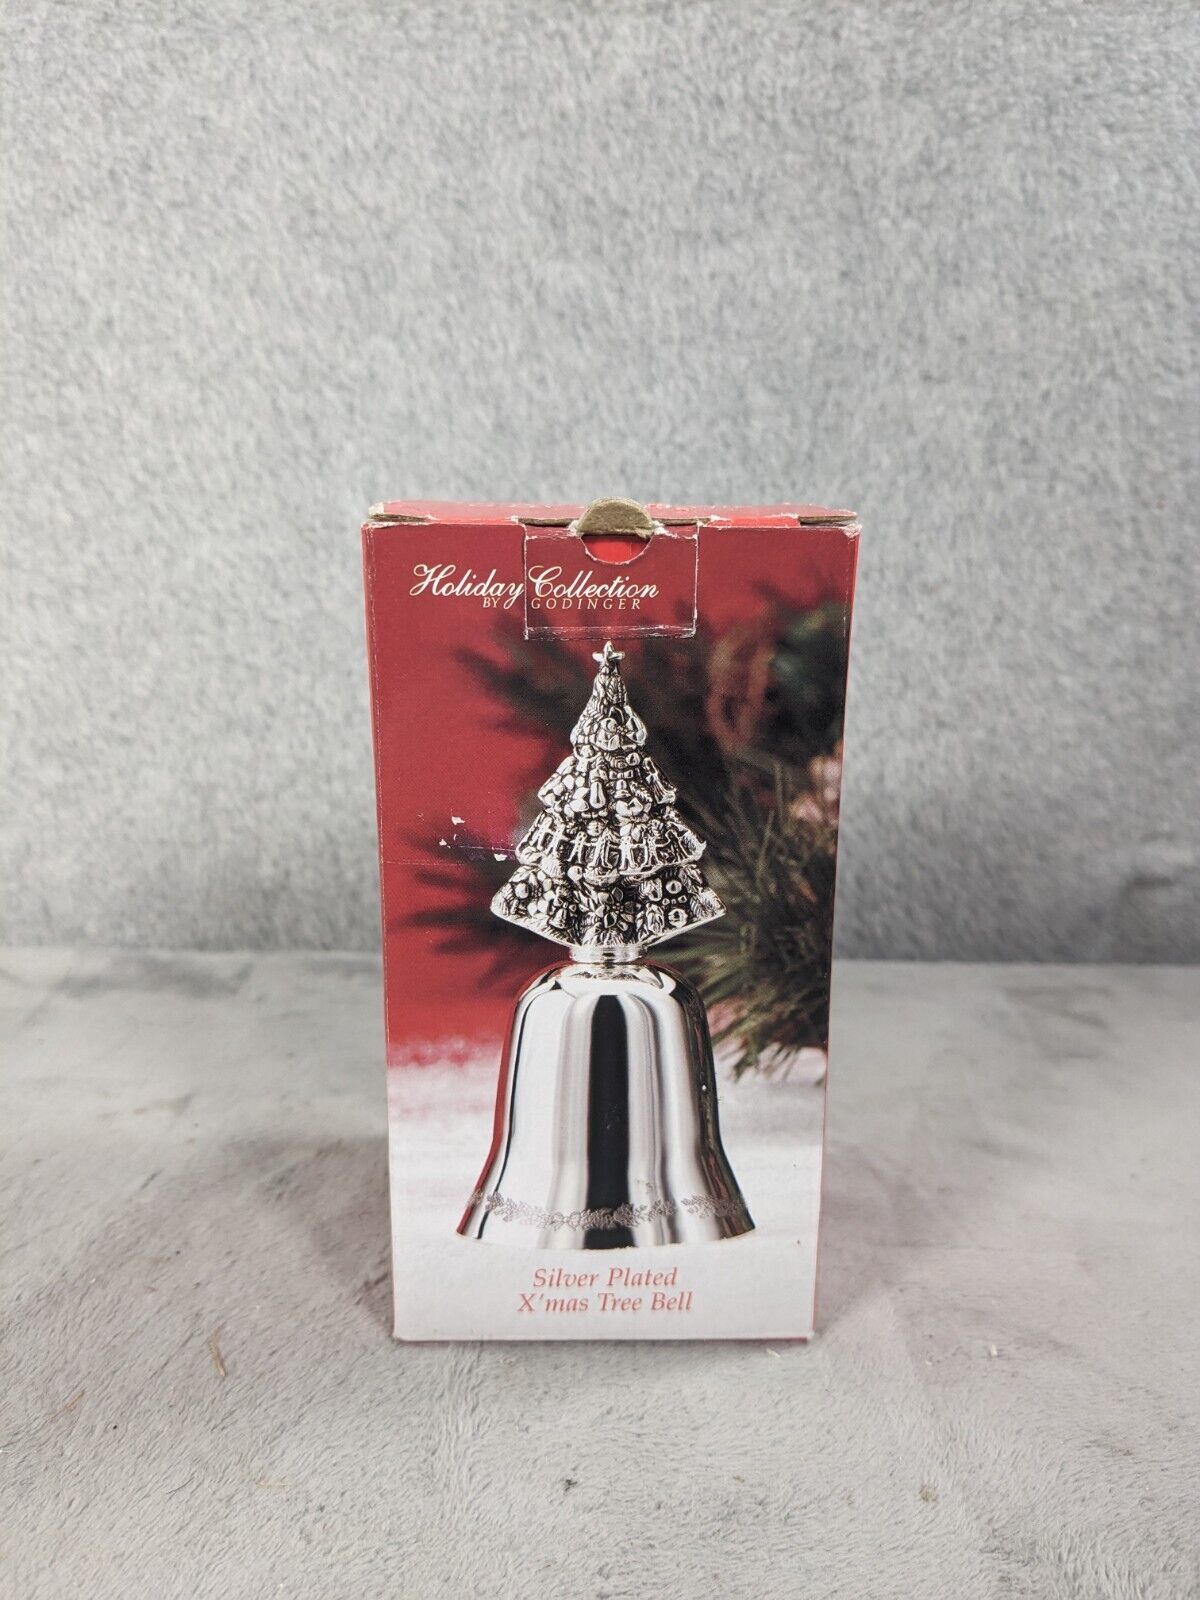 Godinger Silver Plated Xmas Tree Bell Annual Christmas Home Decor